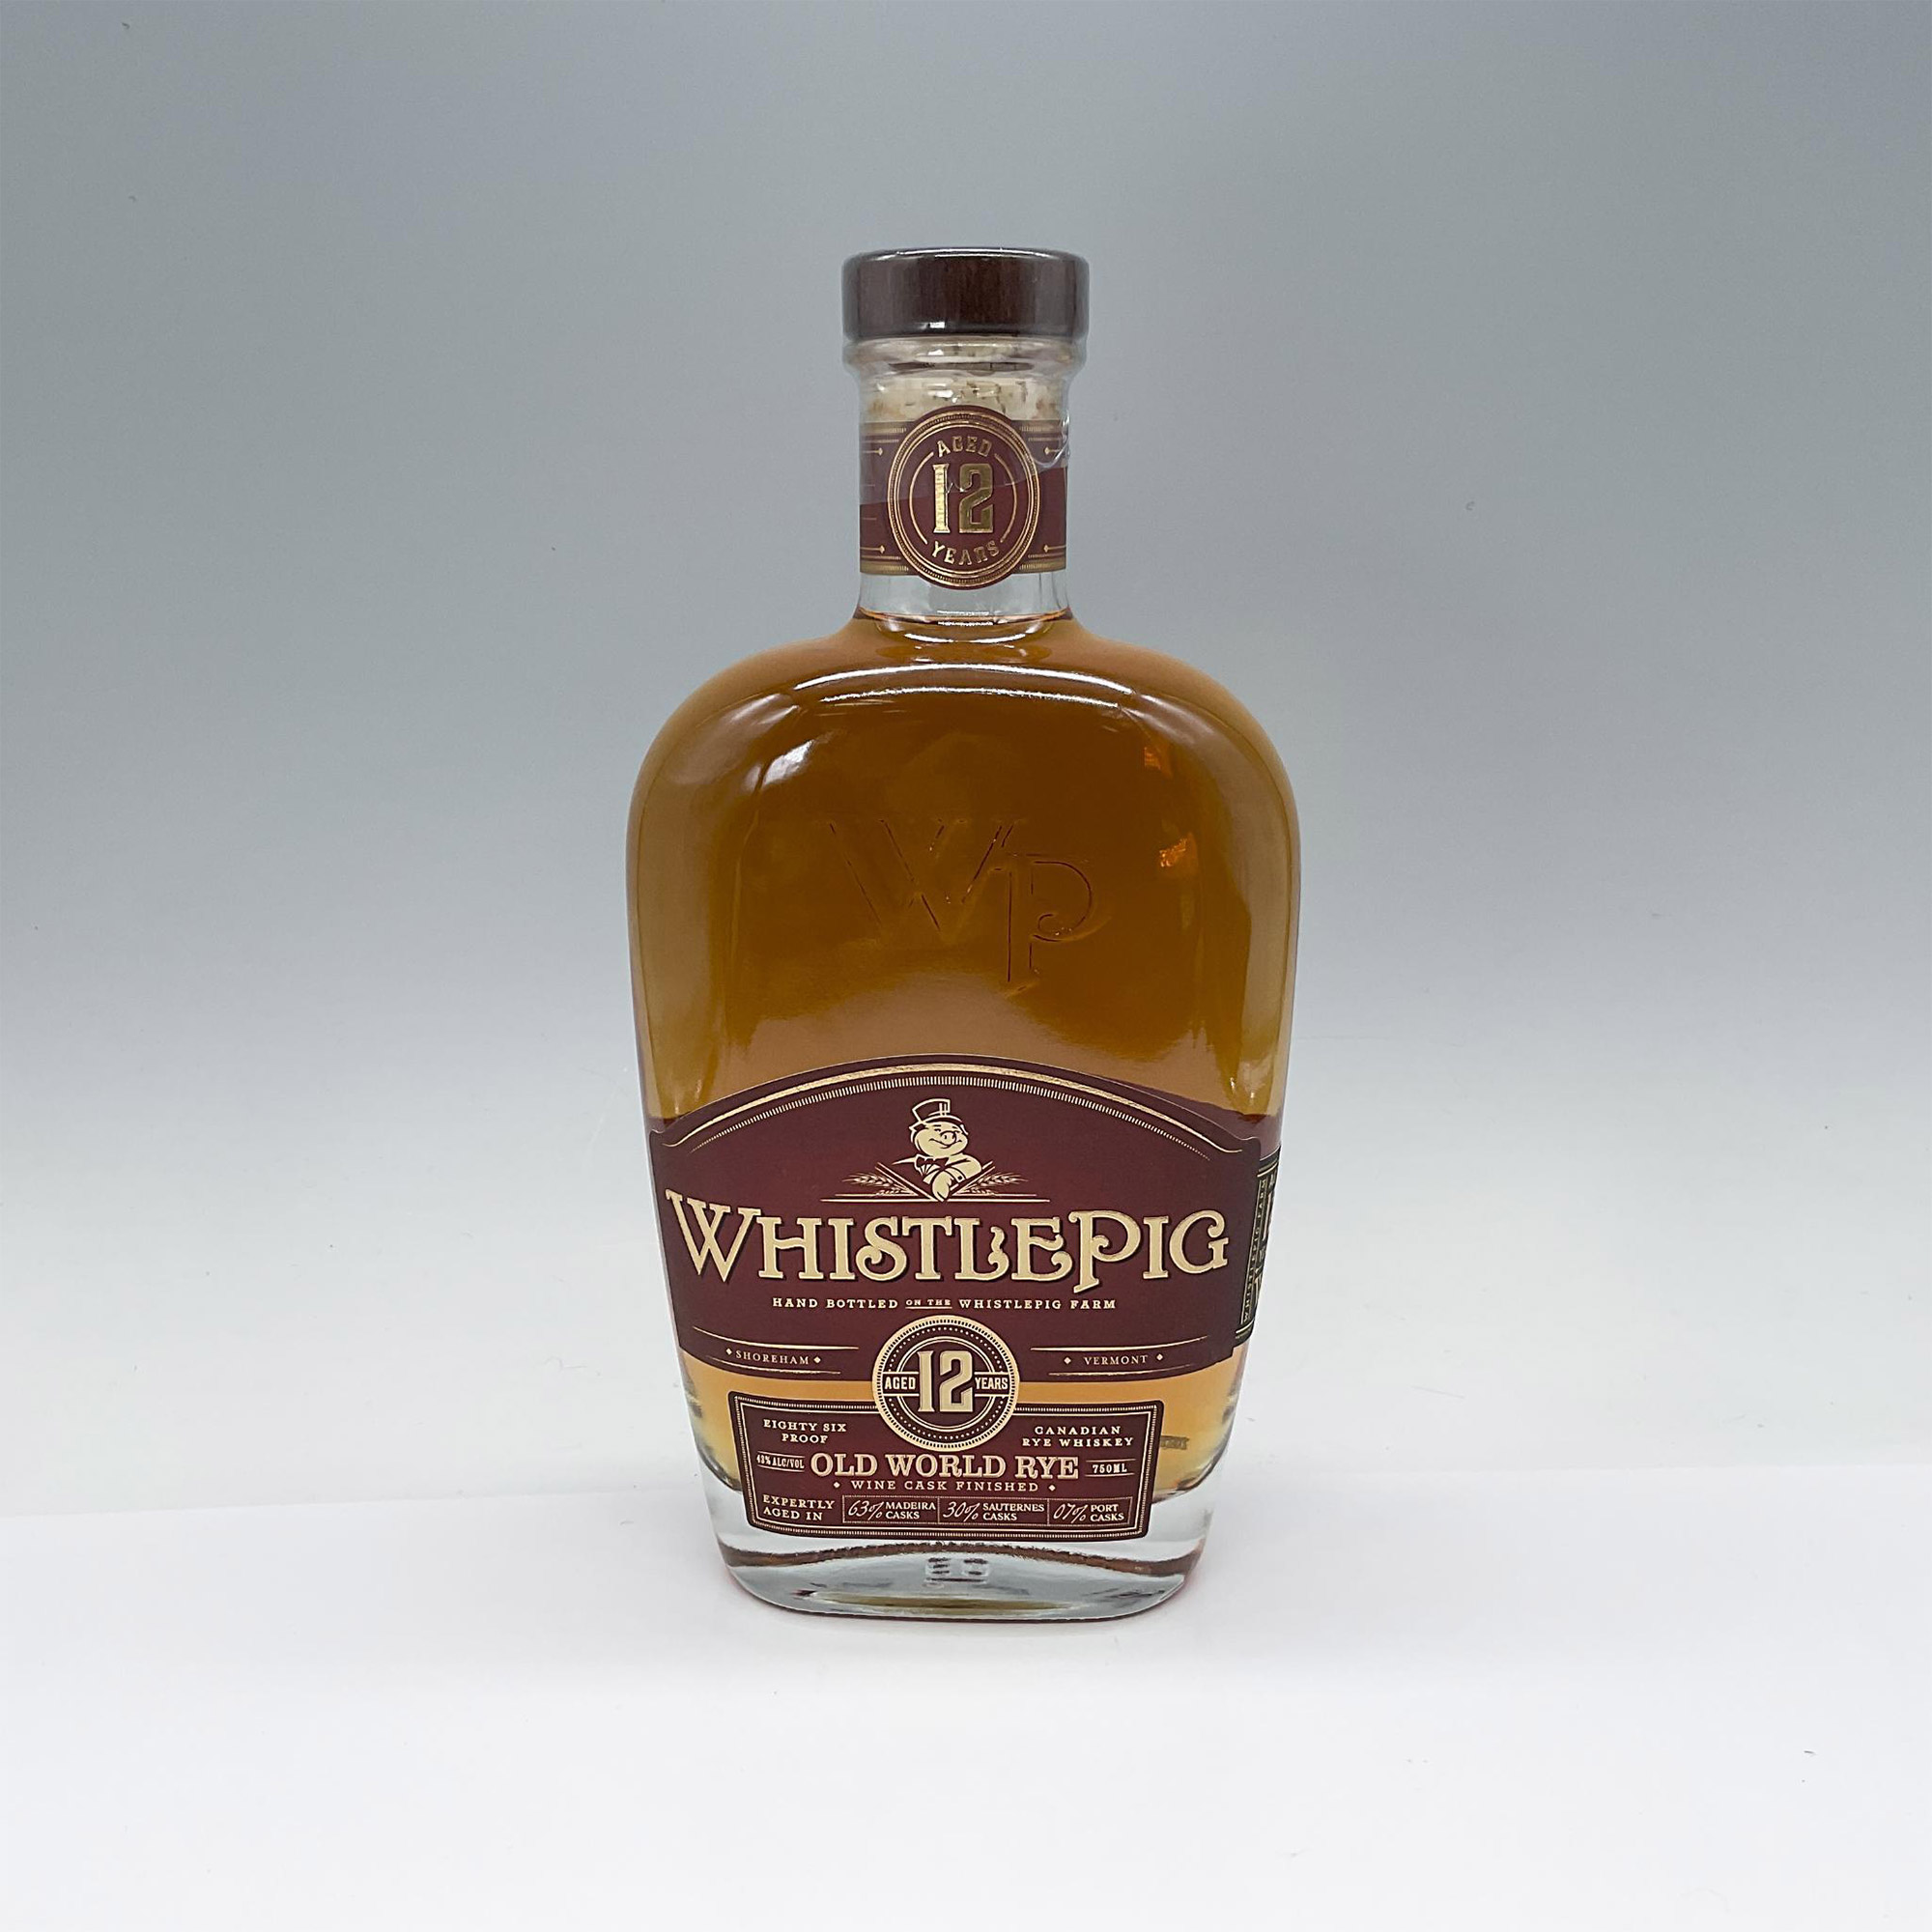 Whistlepig 12 Year Old World Rye Whiskey 86 Proof